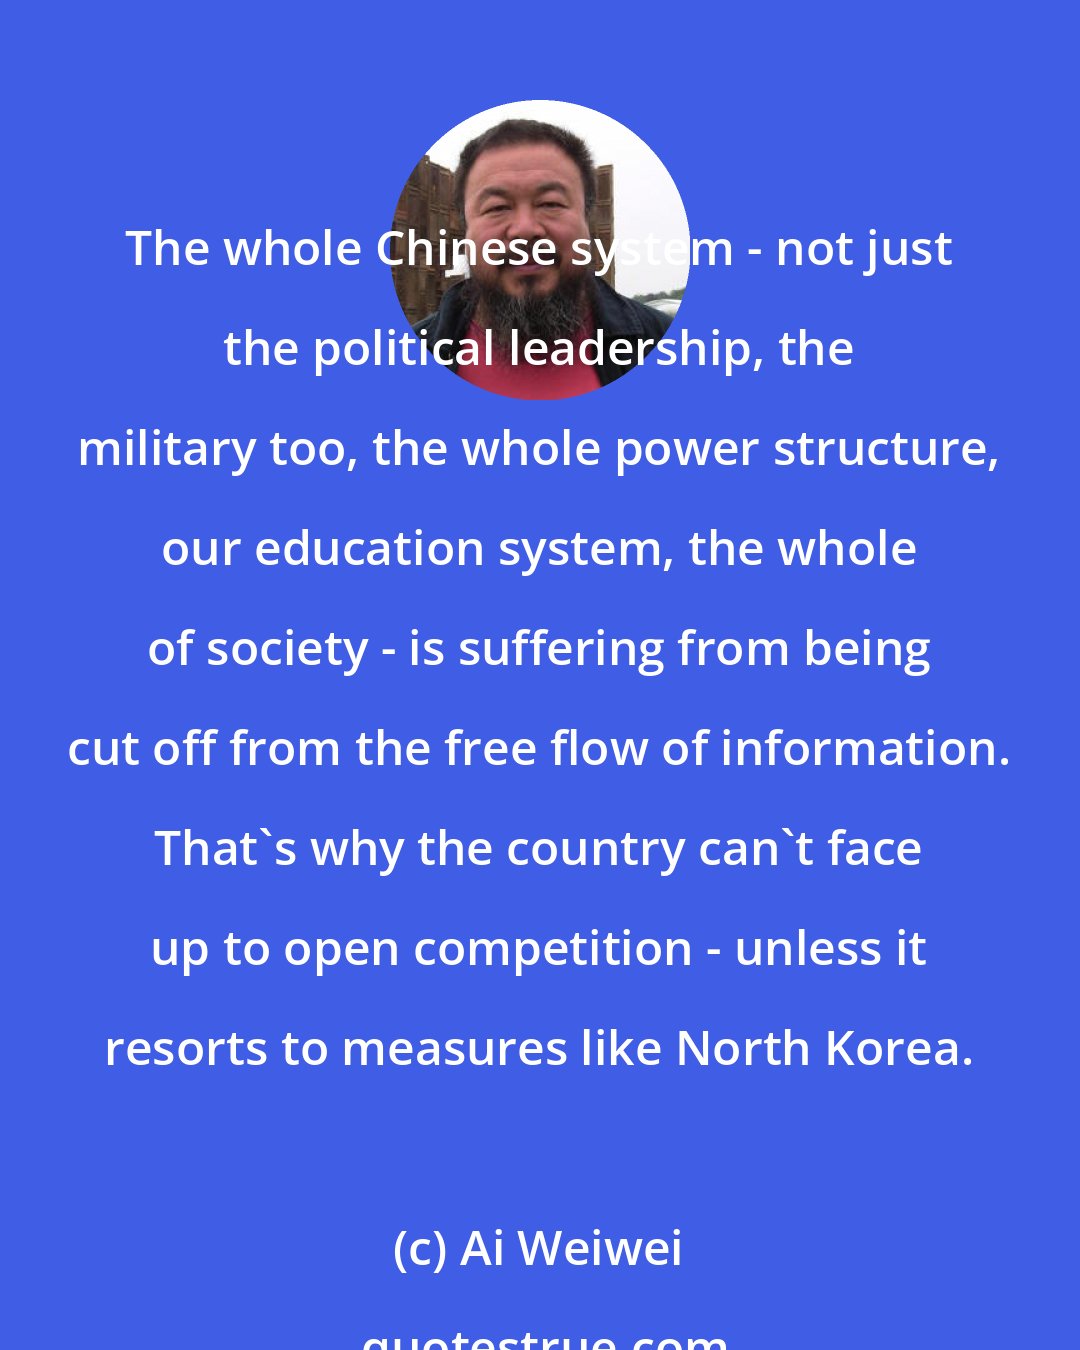 Ai Weiwei: The whole Chinese system - not just the political leadership, the military too, the whole power structure, our education system, the whole of society - is suffering from being cut off from the free flow of information. That's why the country can't face up to open competition - unless it resorts to measures like North Korea.